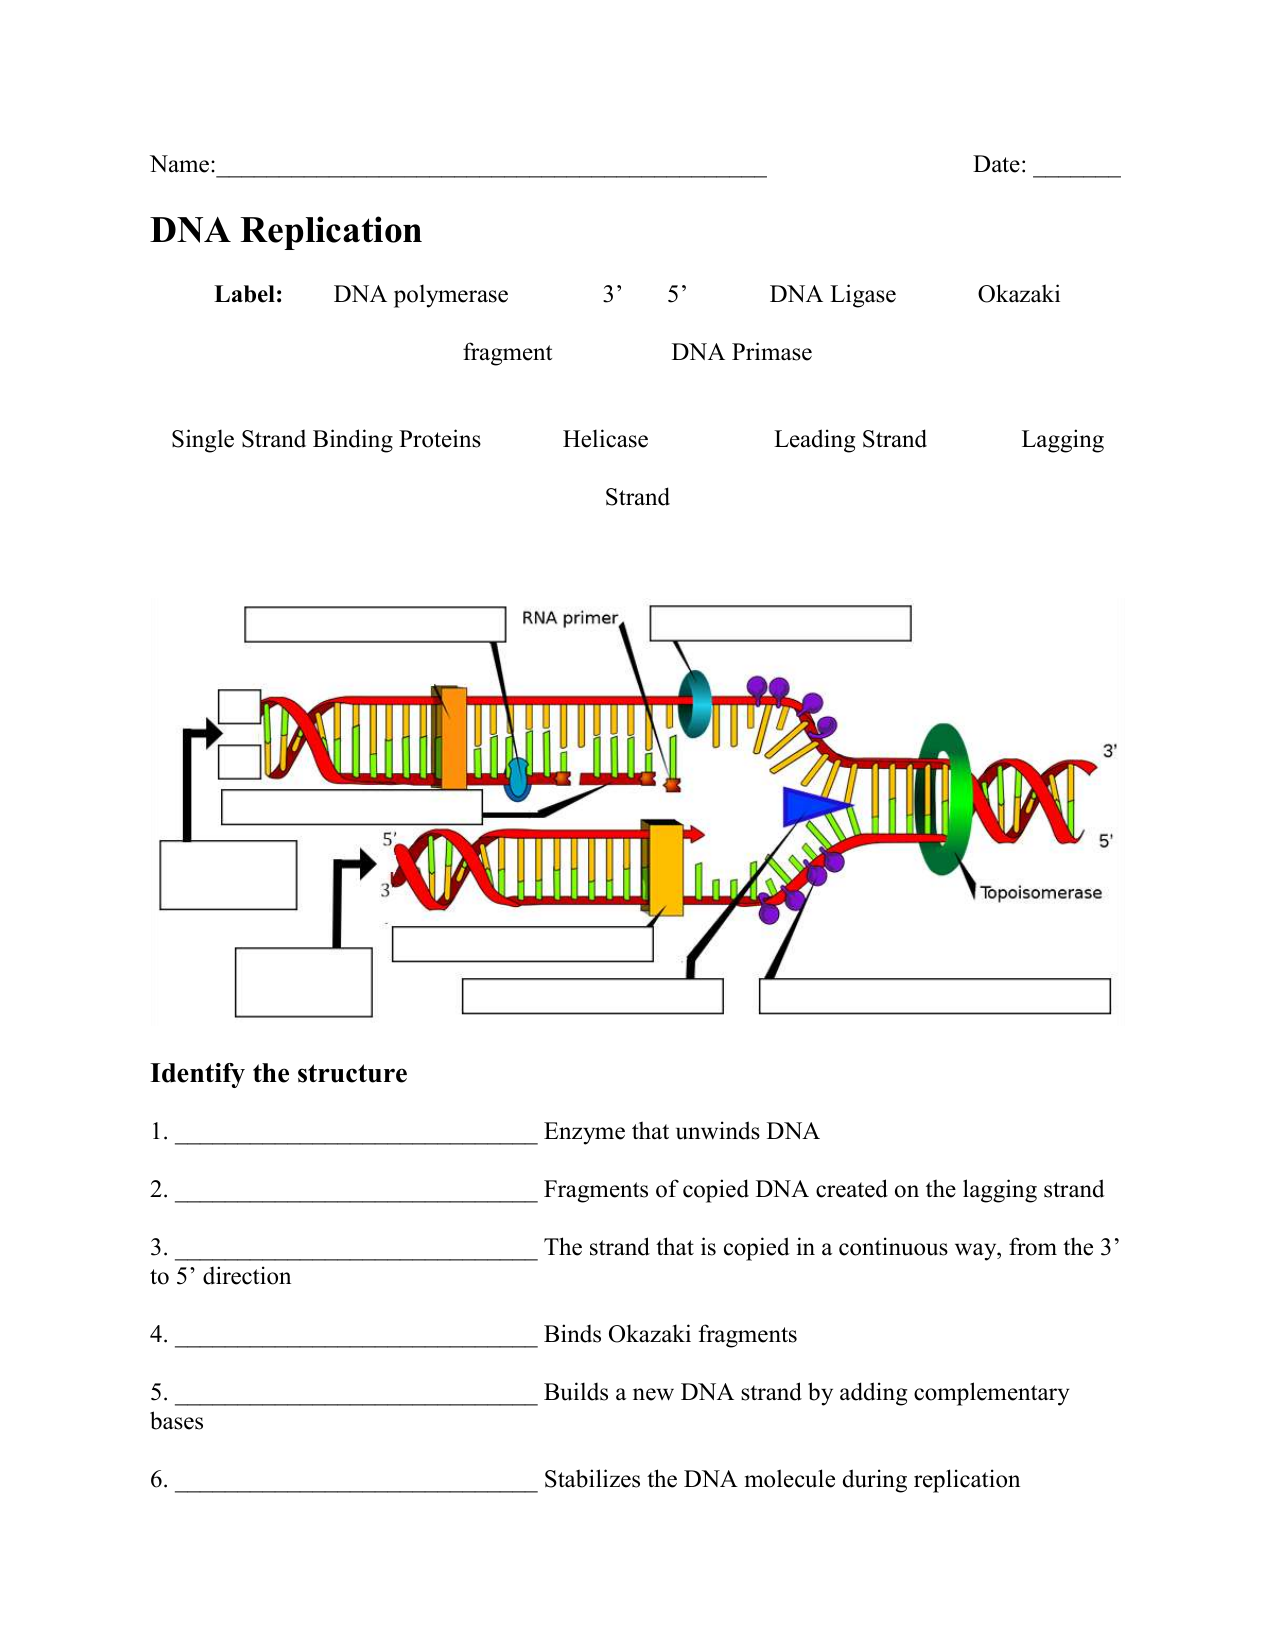 dna-replication-labeling-worksheet-free-download-gmbar-co